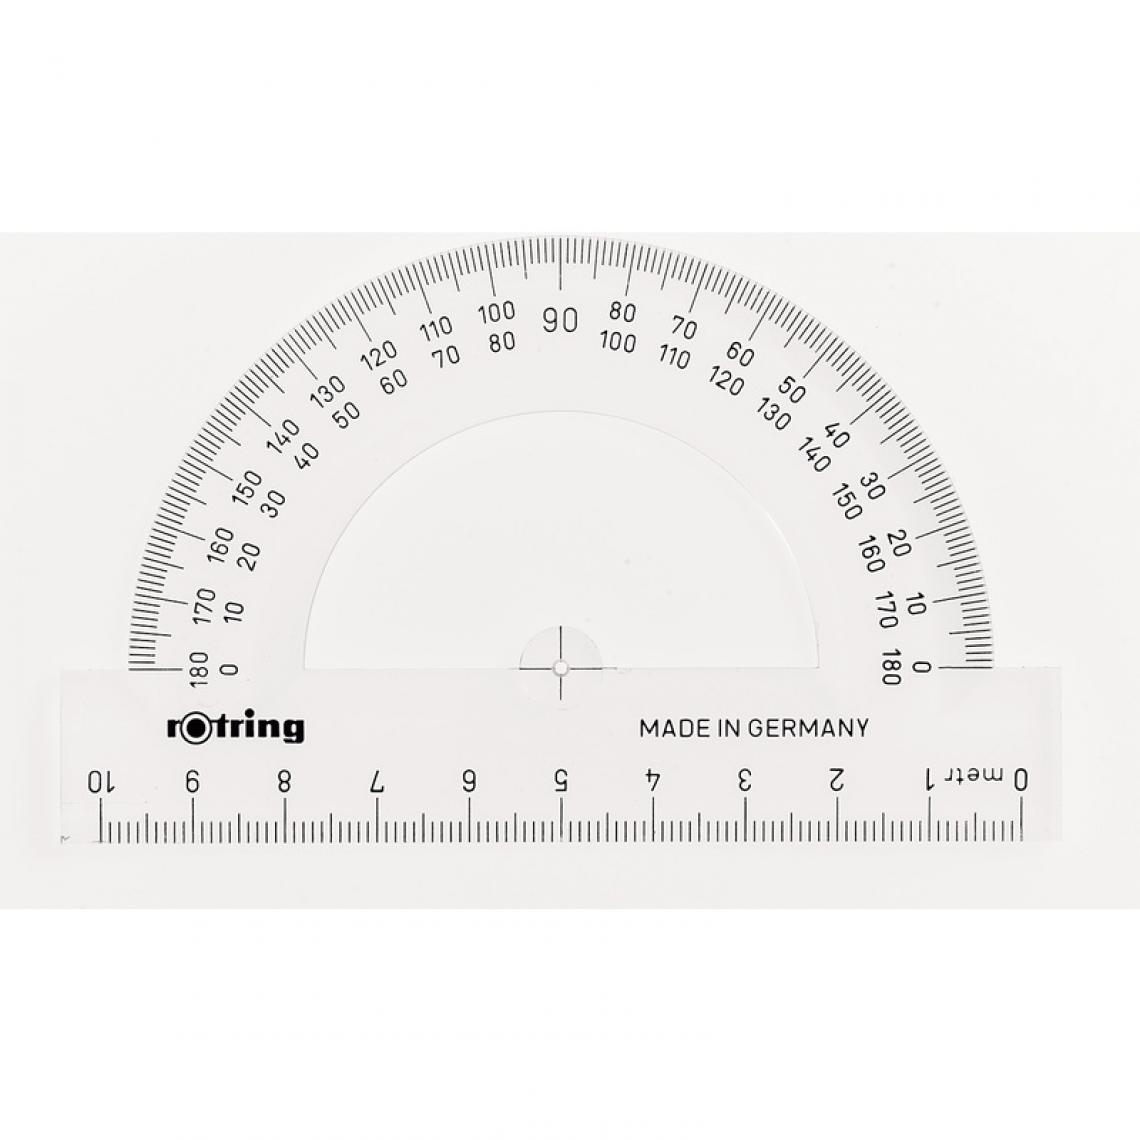 Rotring - Rotring Rapporteur () - Pointes à tracer, cordeaux, marquage